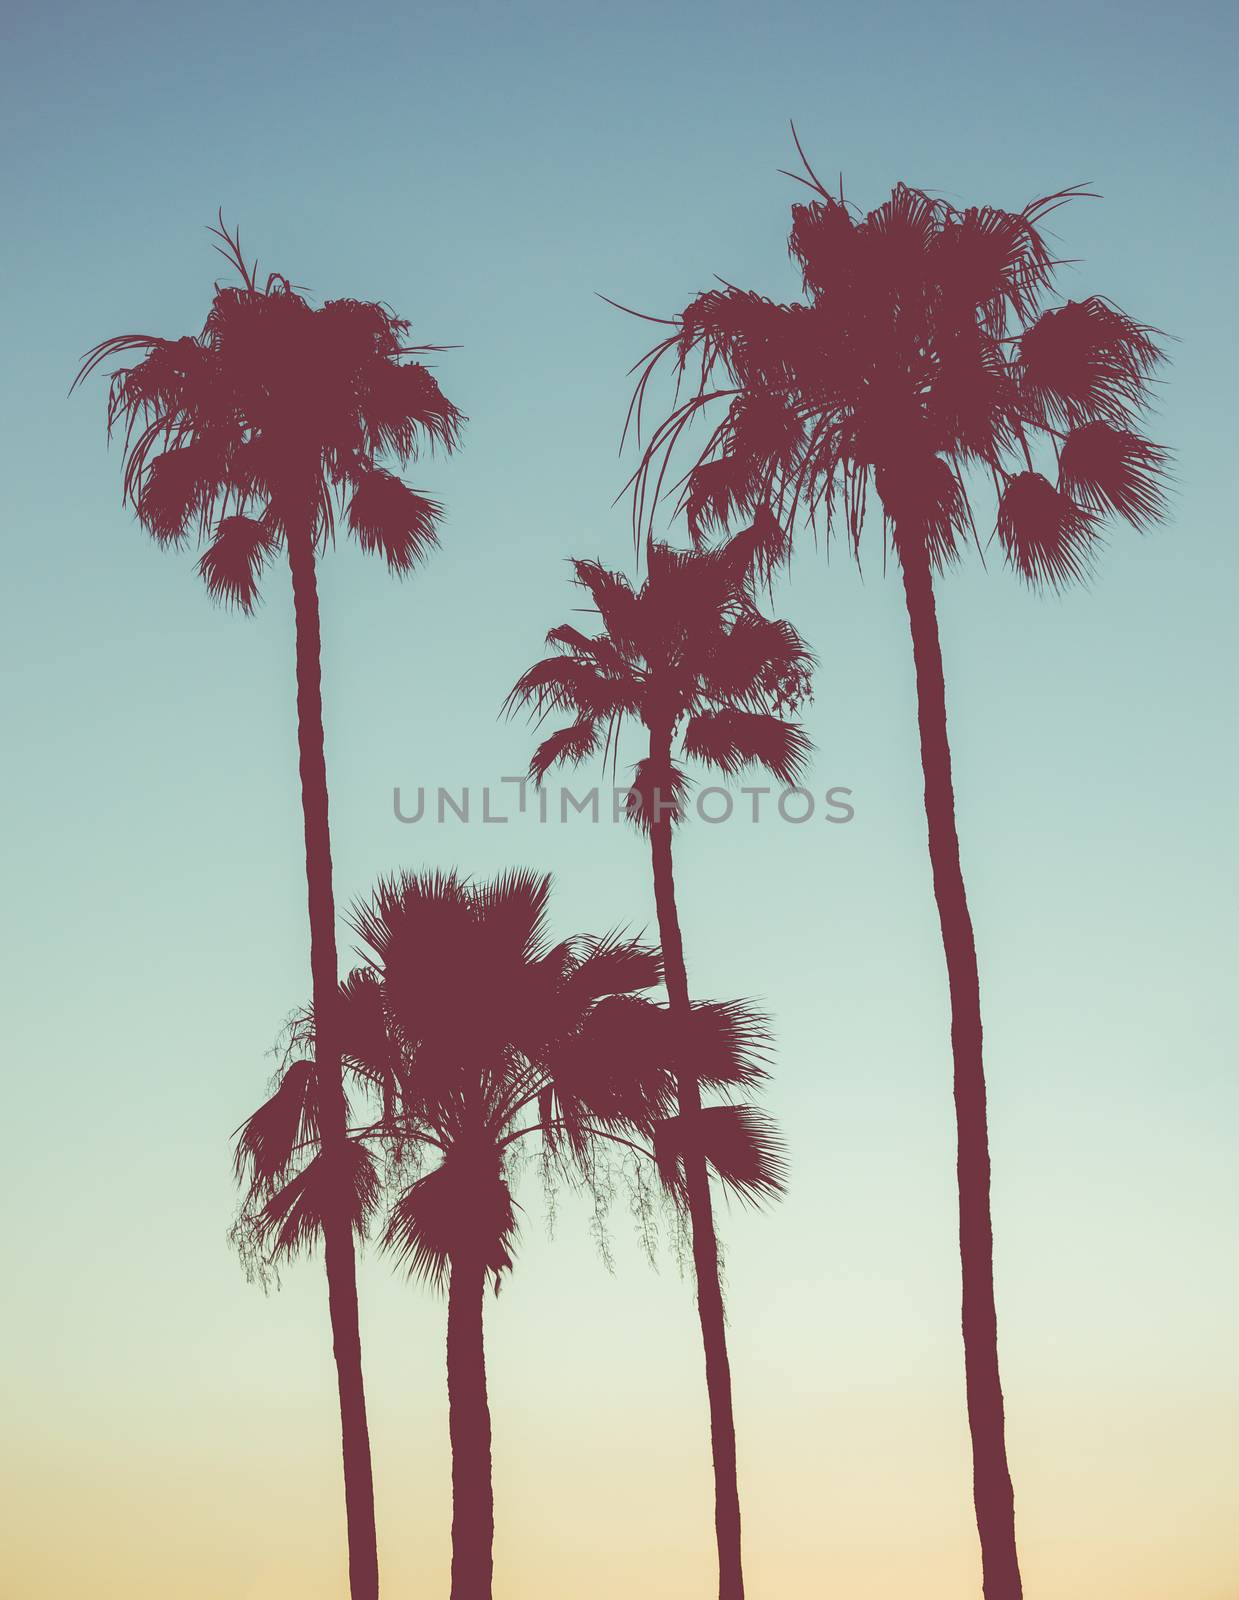 Retro Style Image Of Palm Trees At Sunset